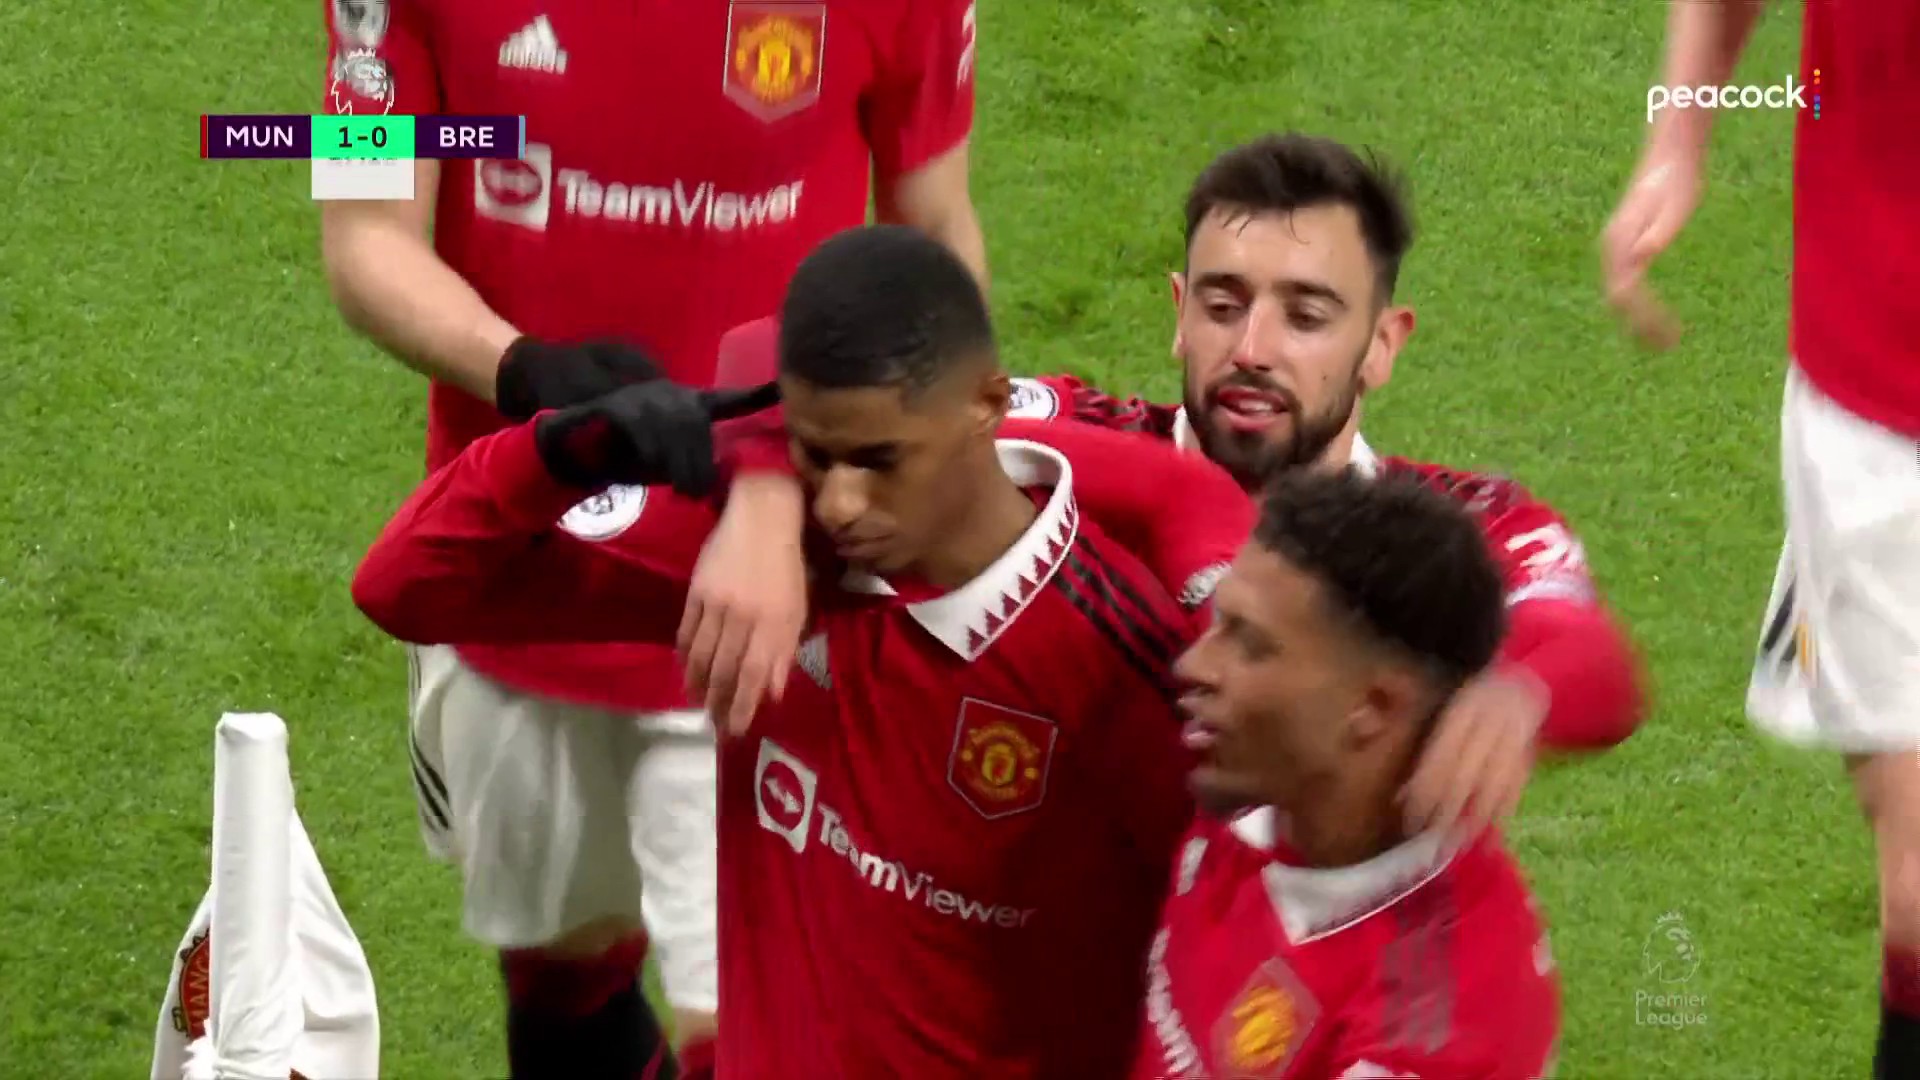 Marcus Rashford blasts it home and Manchester United lead! 🫡

📺: @peacock | #MUNBRE”